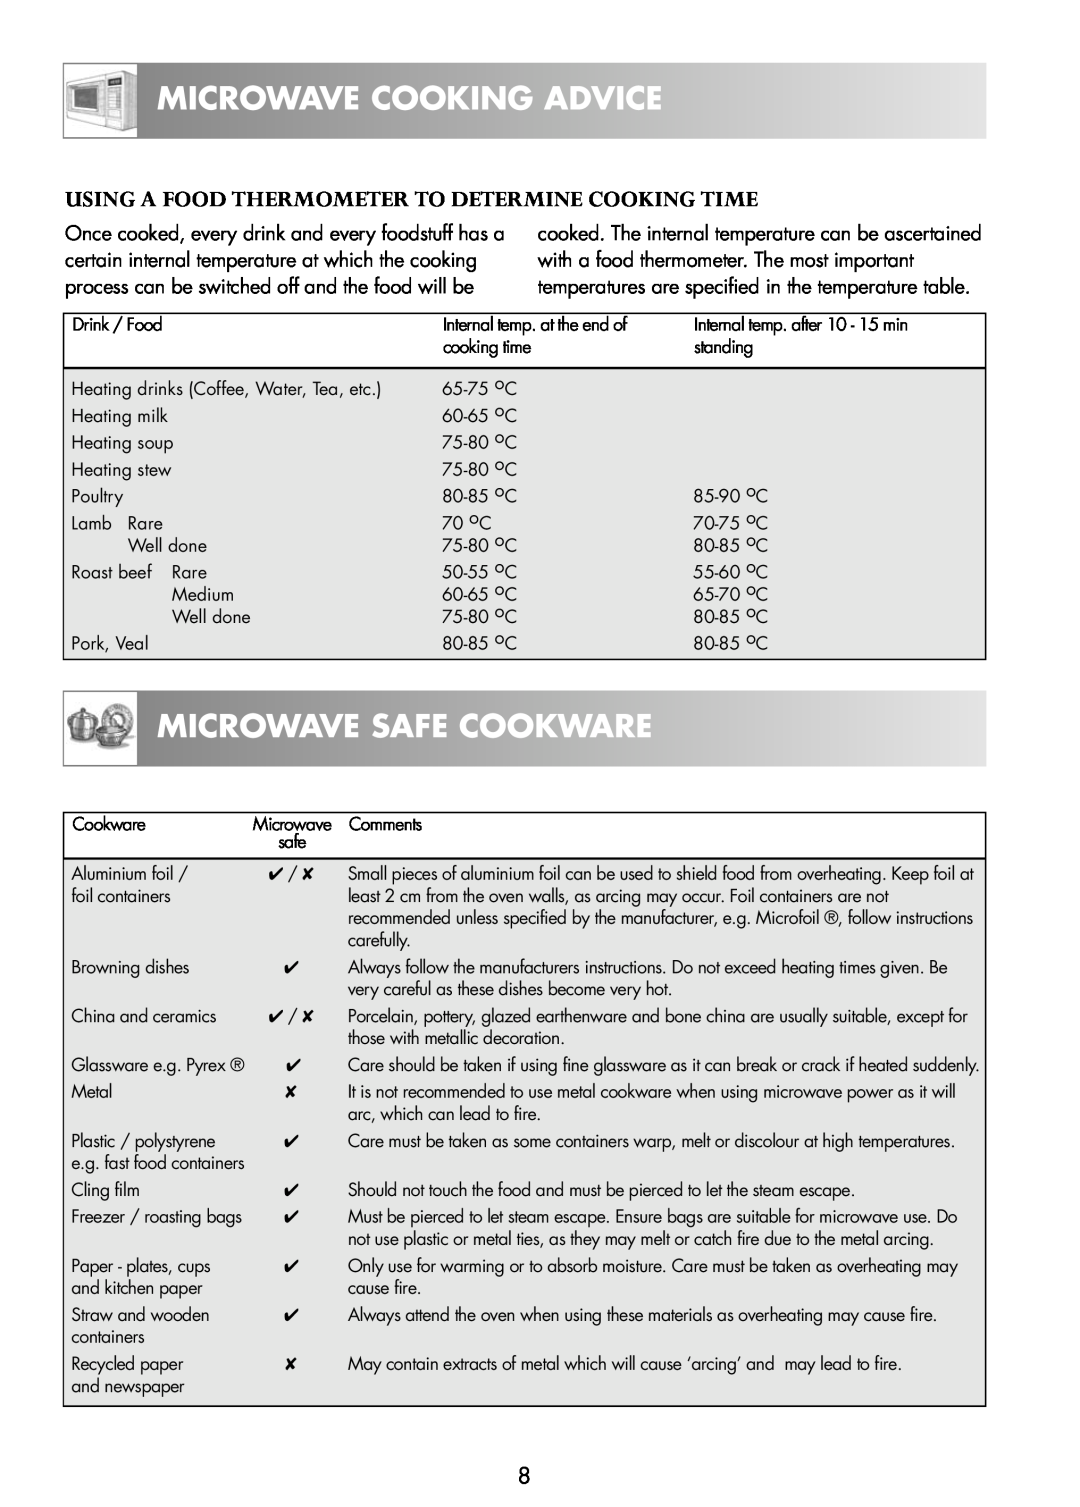 Zanussi ZNM11X Microwave Safe Cookware, Using A Food Thermometer To Determine Cooking Time, Microwave Cooking Advice 